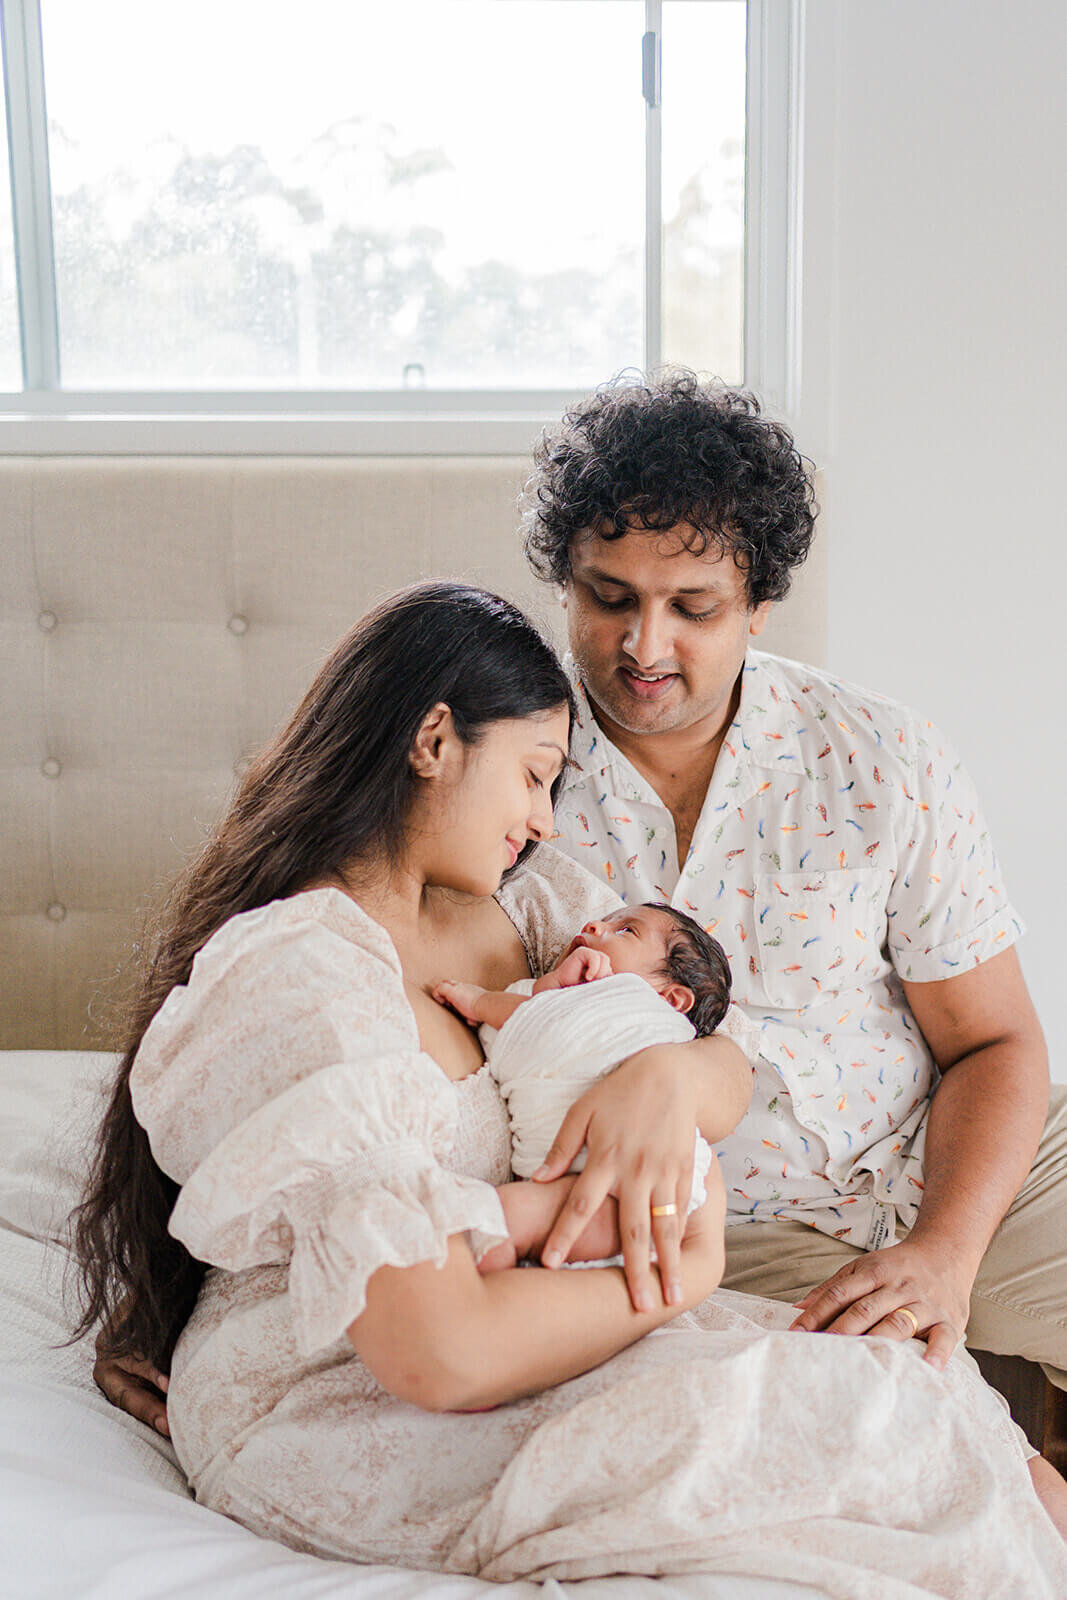 Capture precious moments: mum, dad and newborn in Gold Coast in-home session as part of their newborn maternity portrait package.